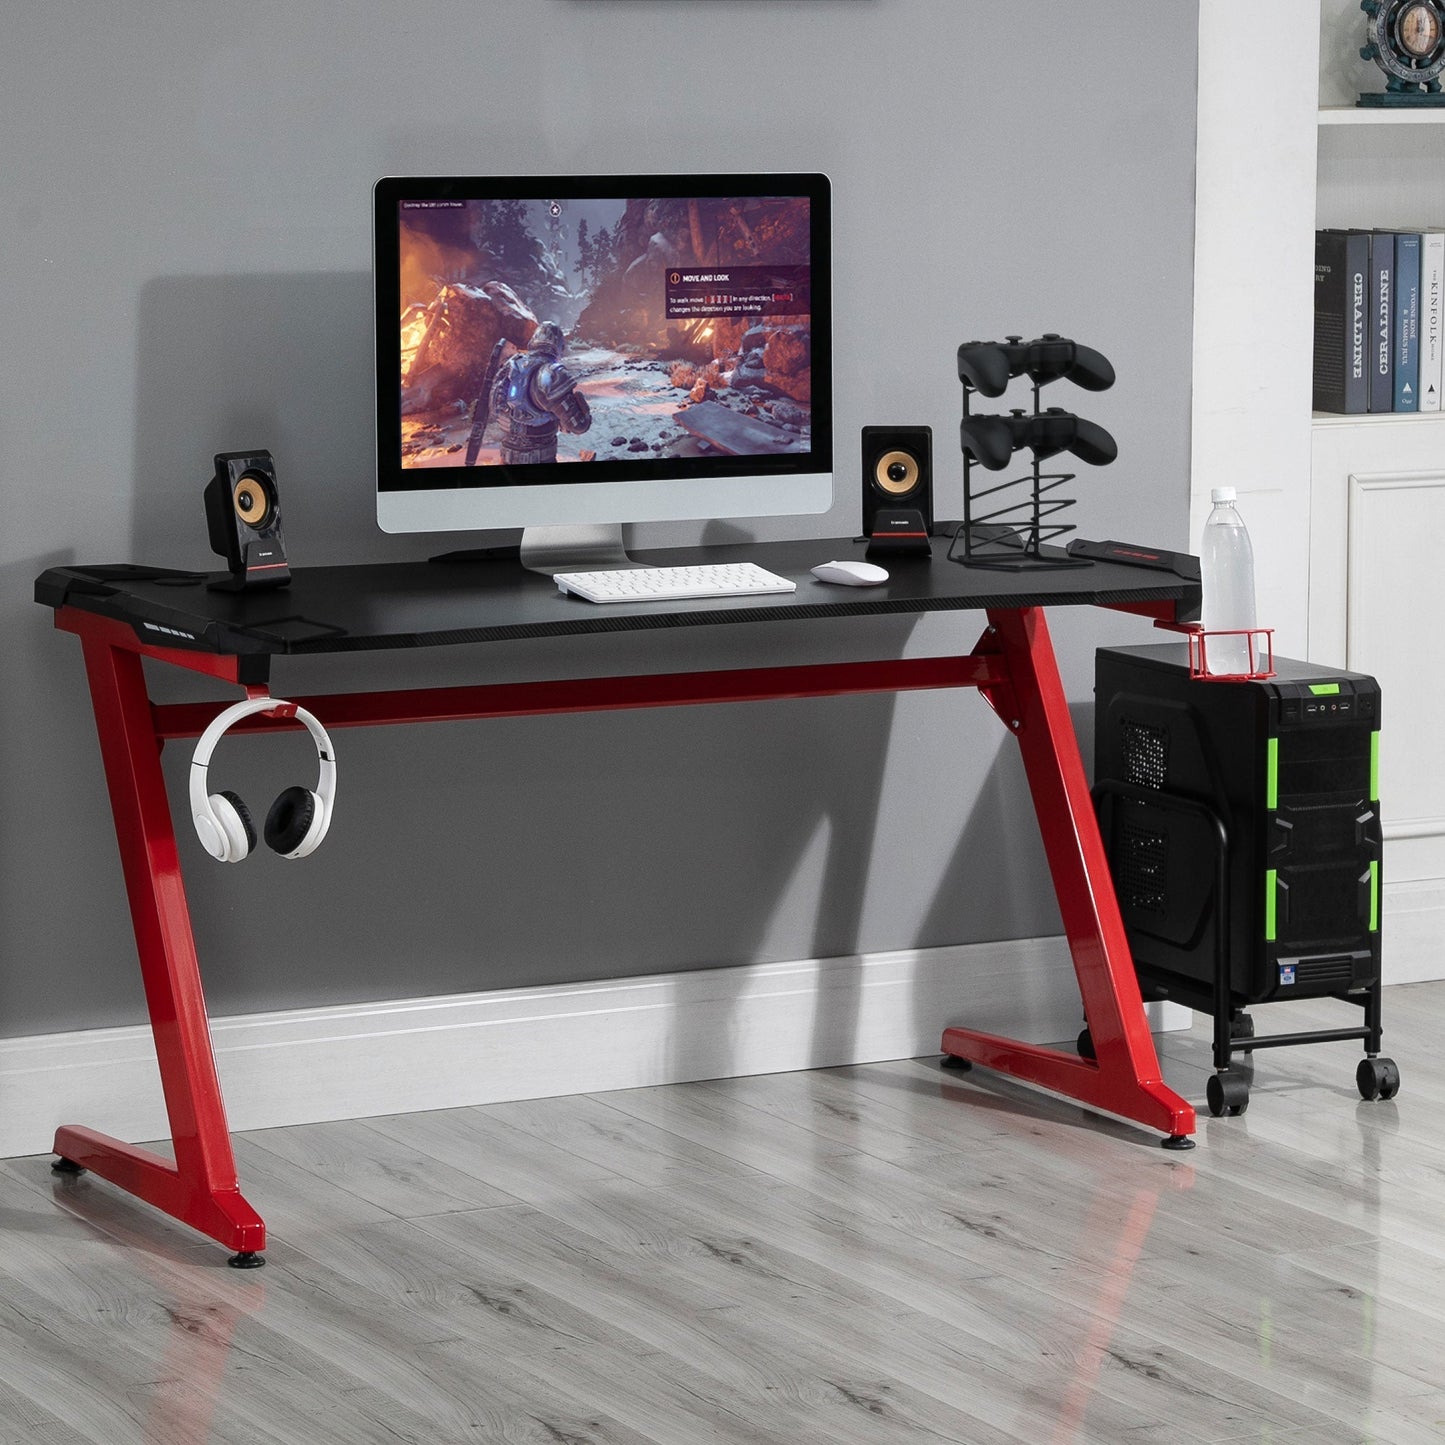 Maplin Plus Large Gaming Desk with Cup Holder, Headphone Hook & Cable Management - maplin.co.uk